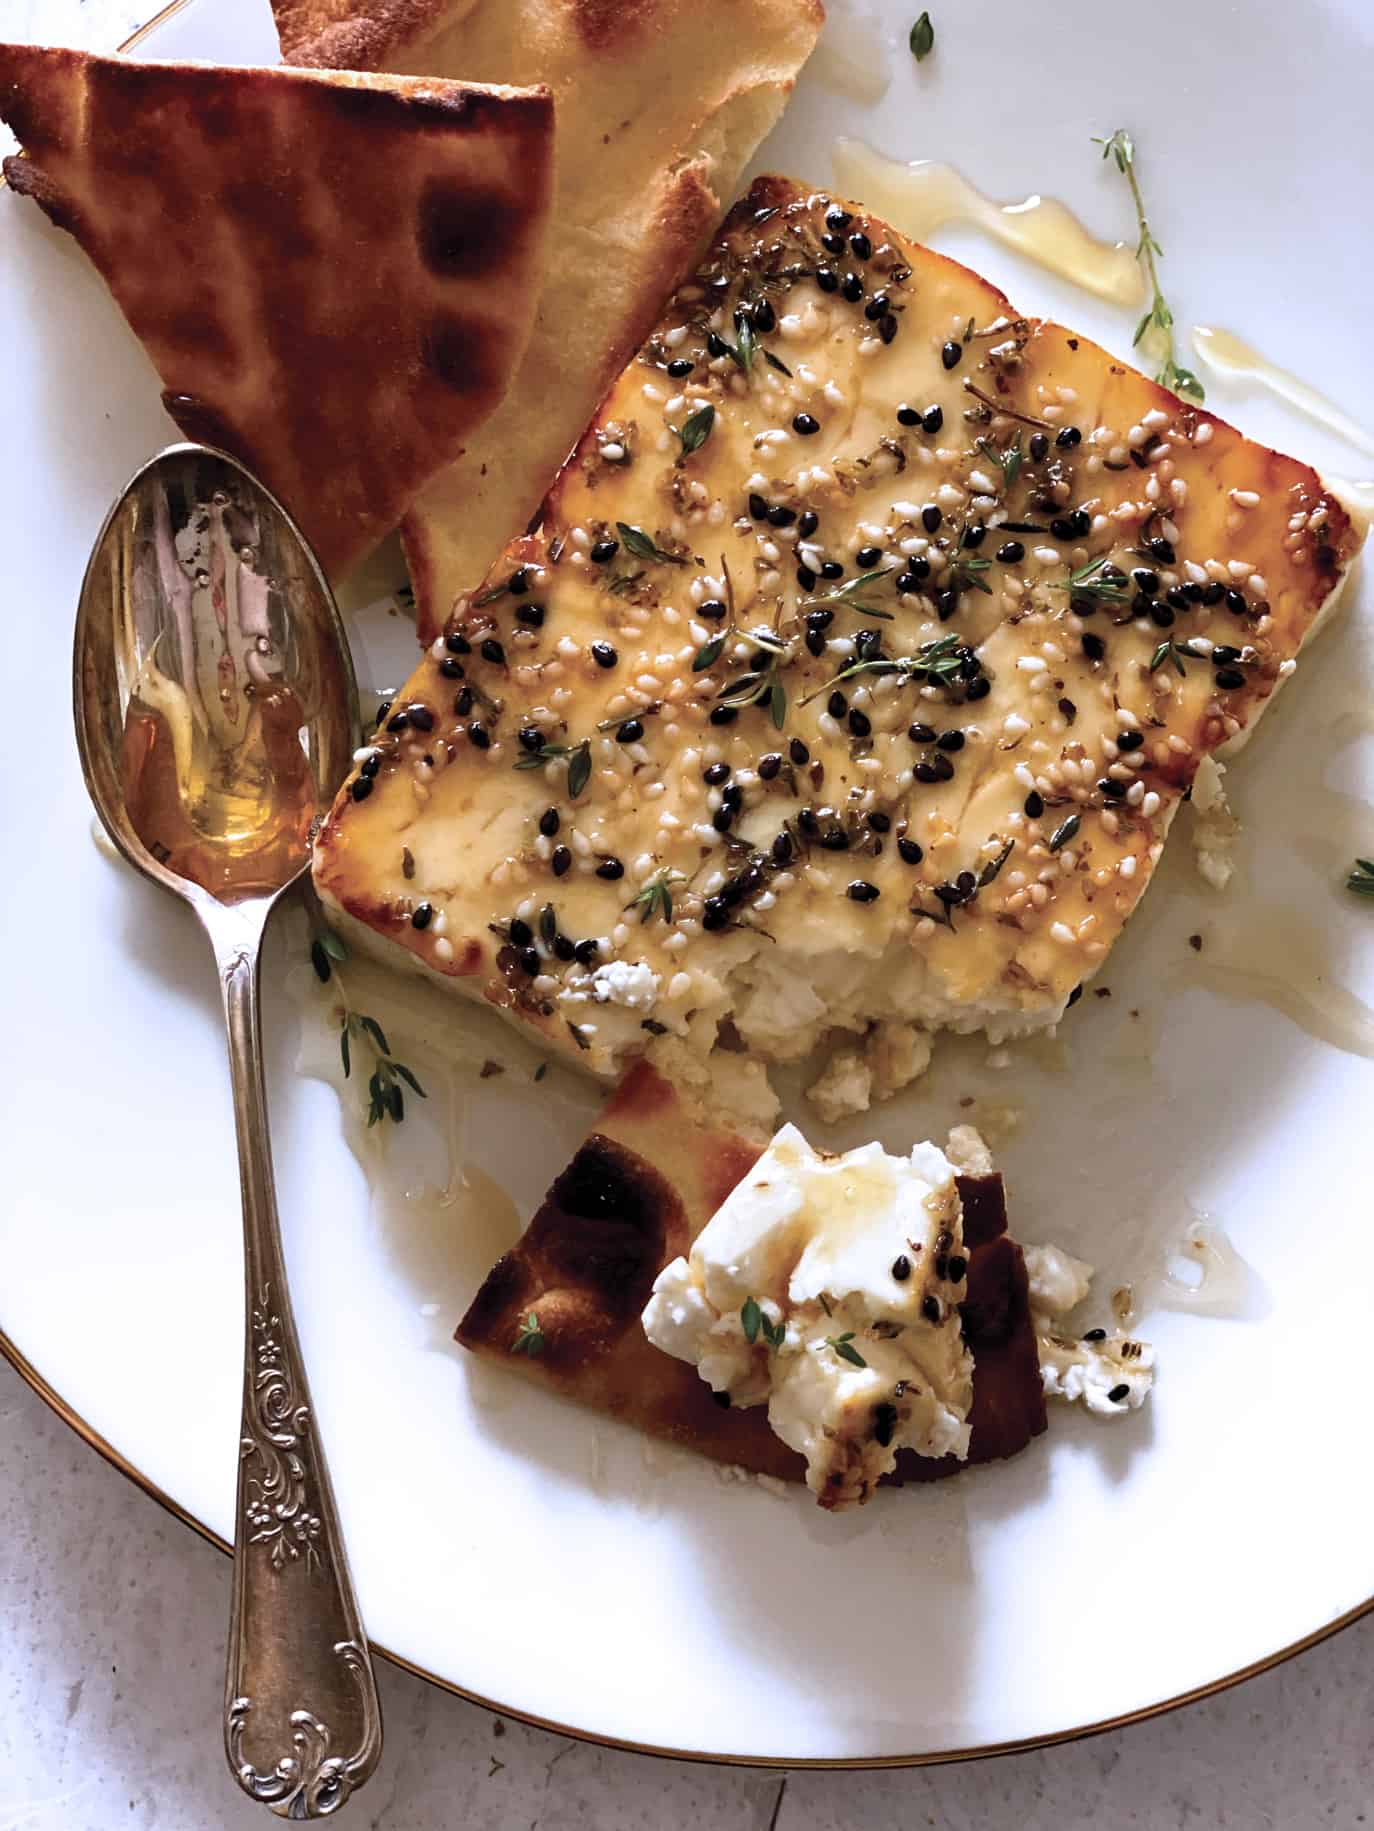 A block of roasted feta cheese with sesame seeds, honey and fresh thyme on a white plate with a spoon and cut up pita breads.